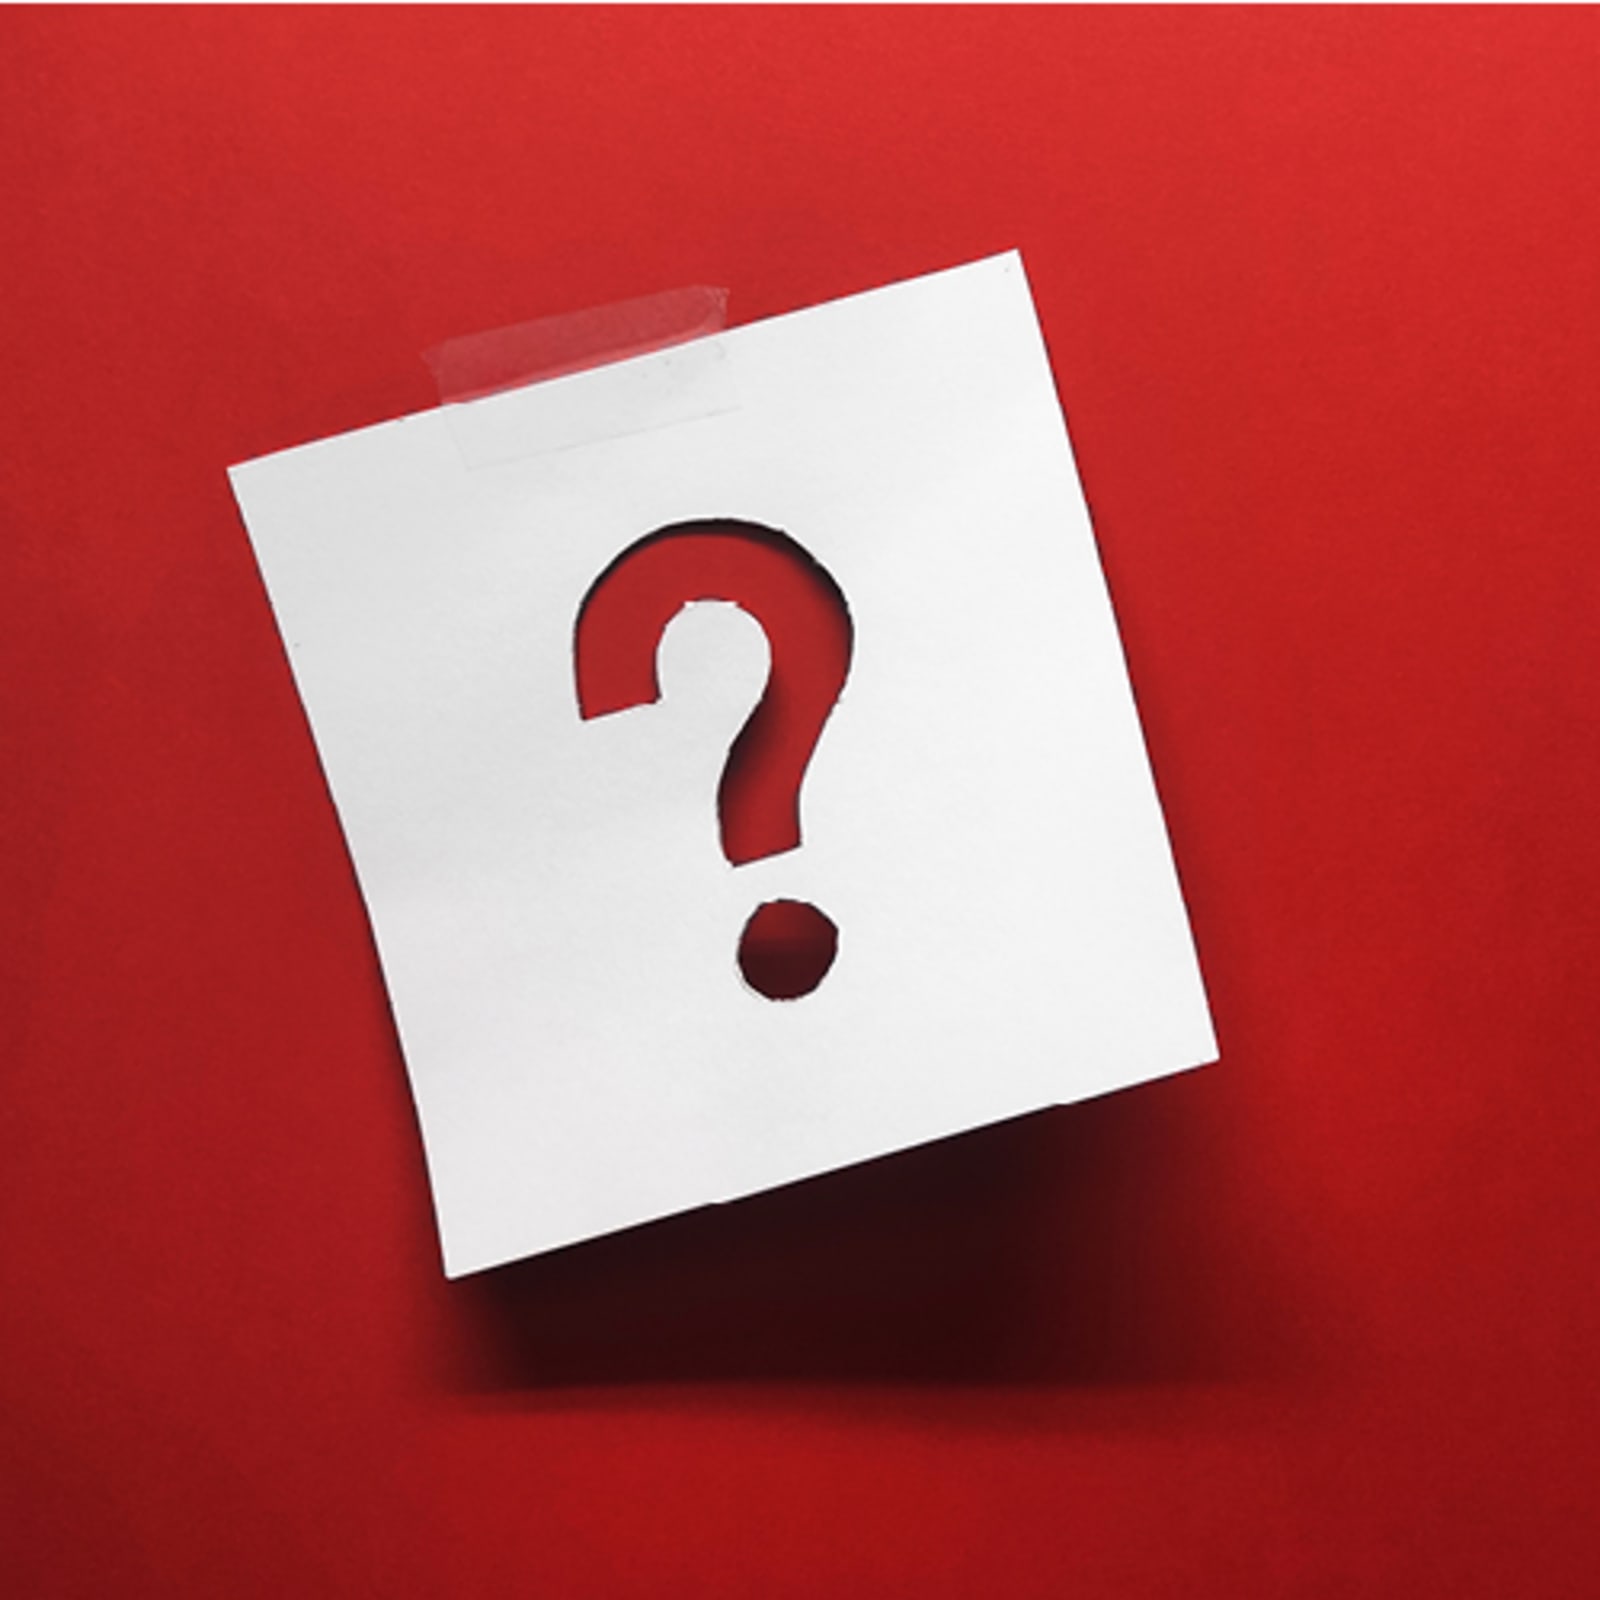 Red background with sticky note that has a question mark